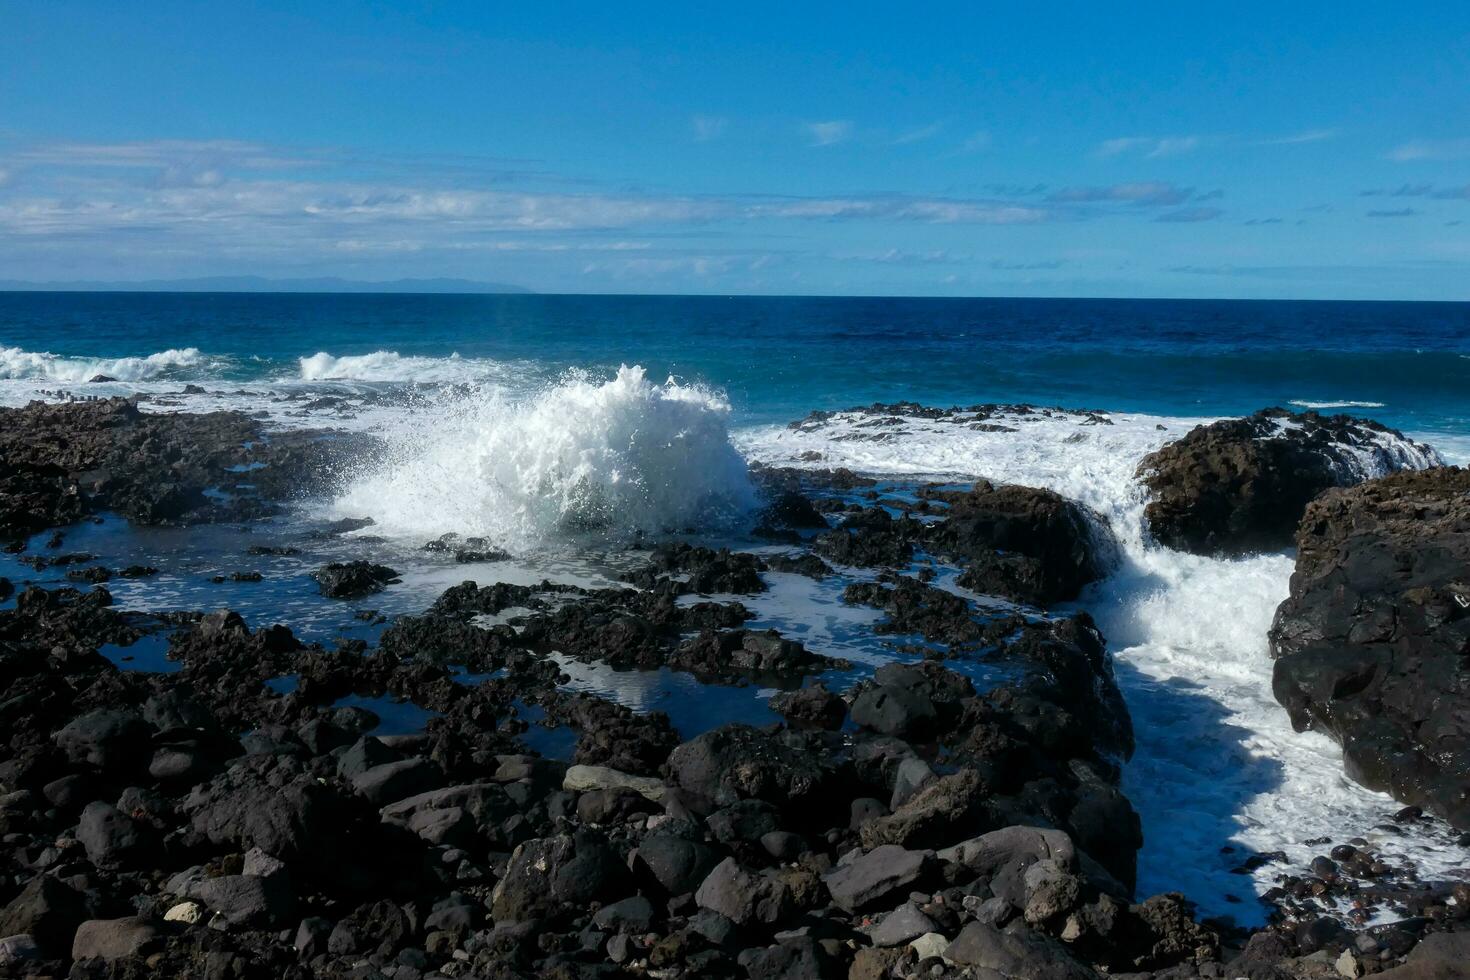 Large waves crashing against the rocks in the ocean photo